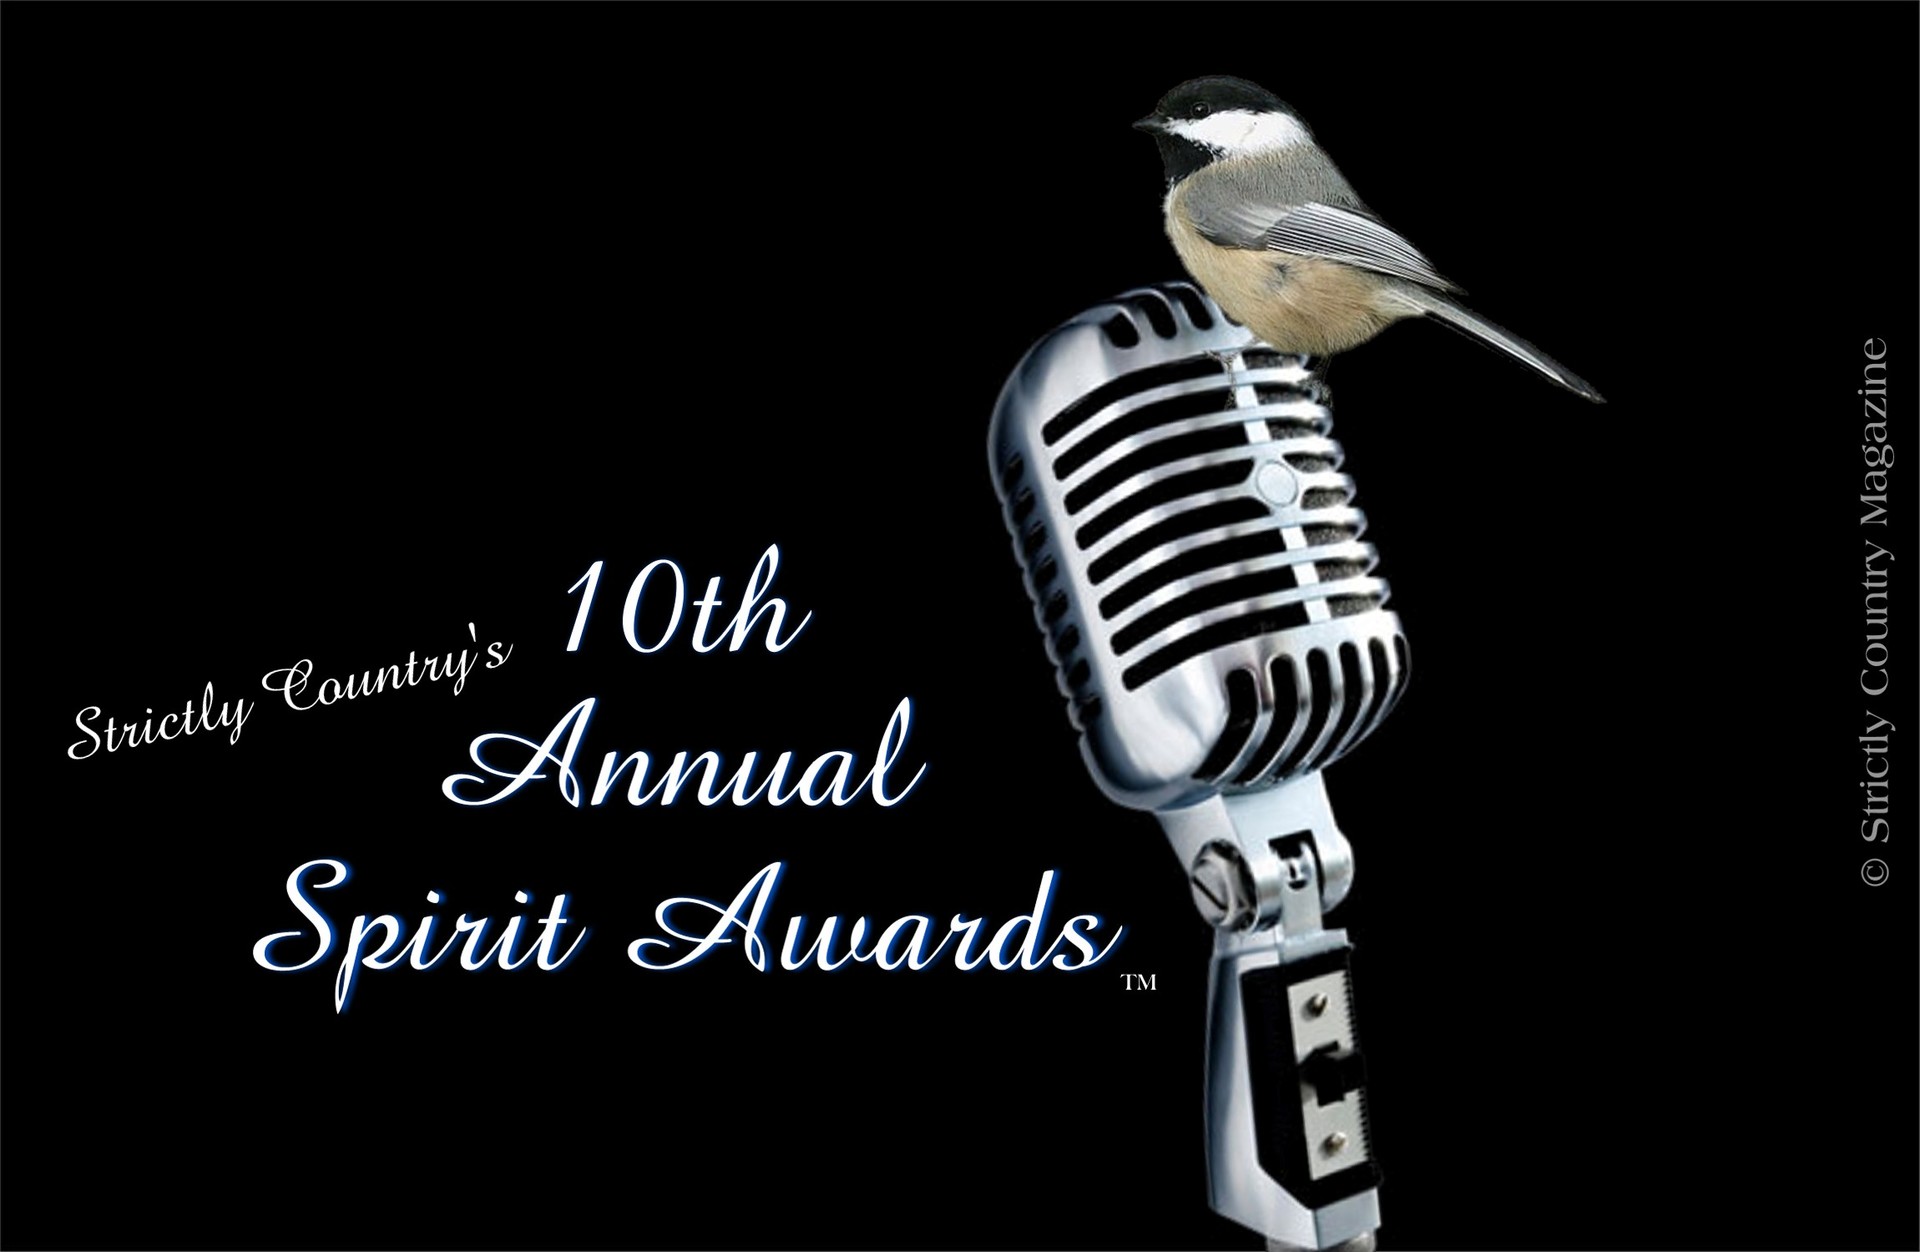 Strictly Country Magazine copyright 10th Annual Spirit Awards official logo